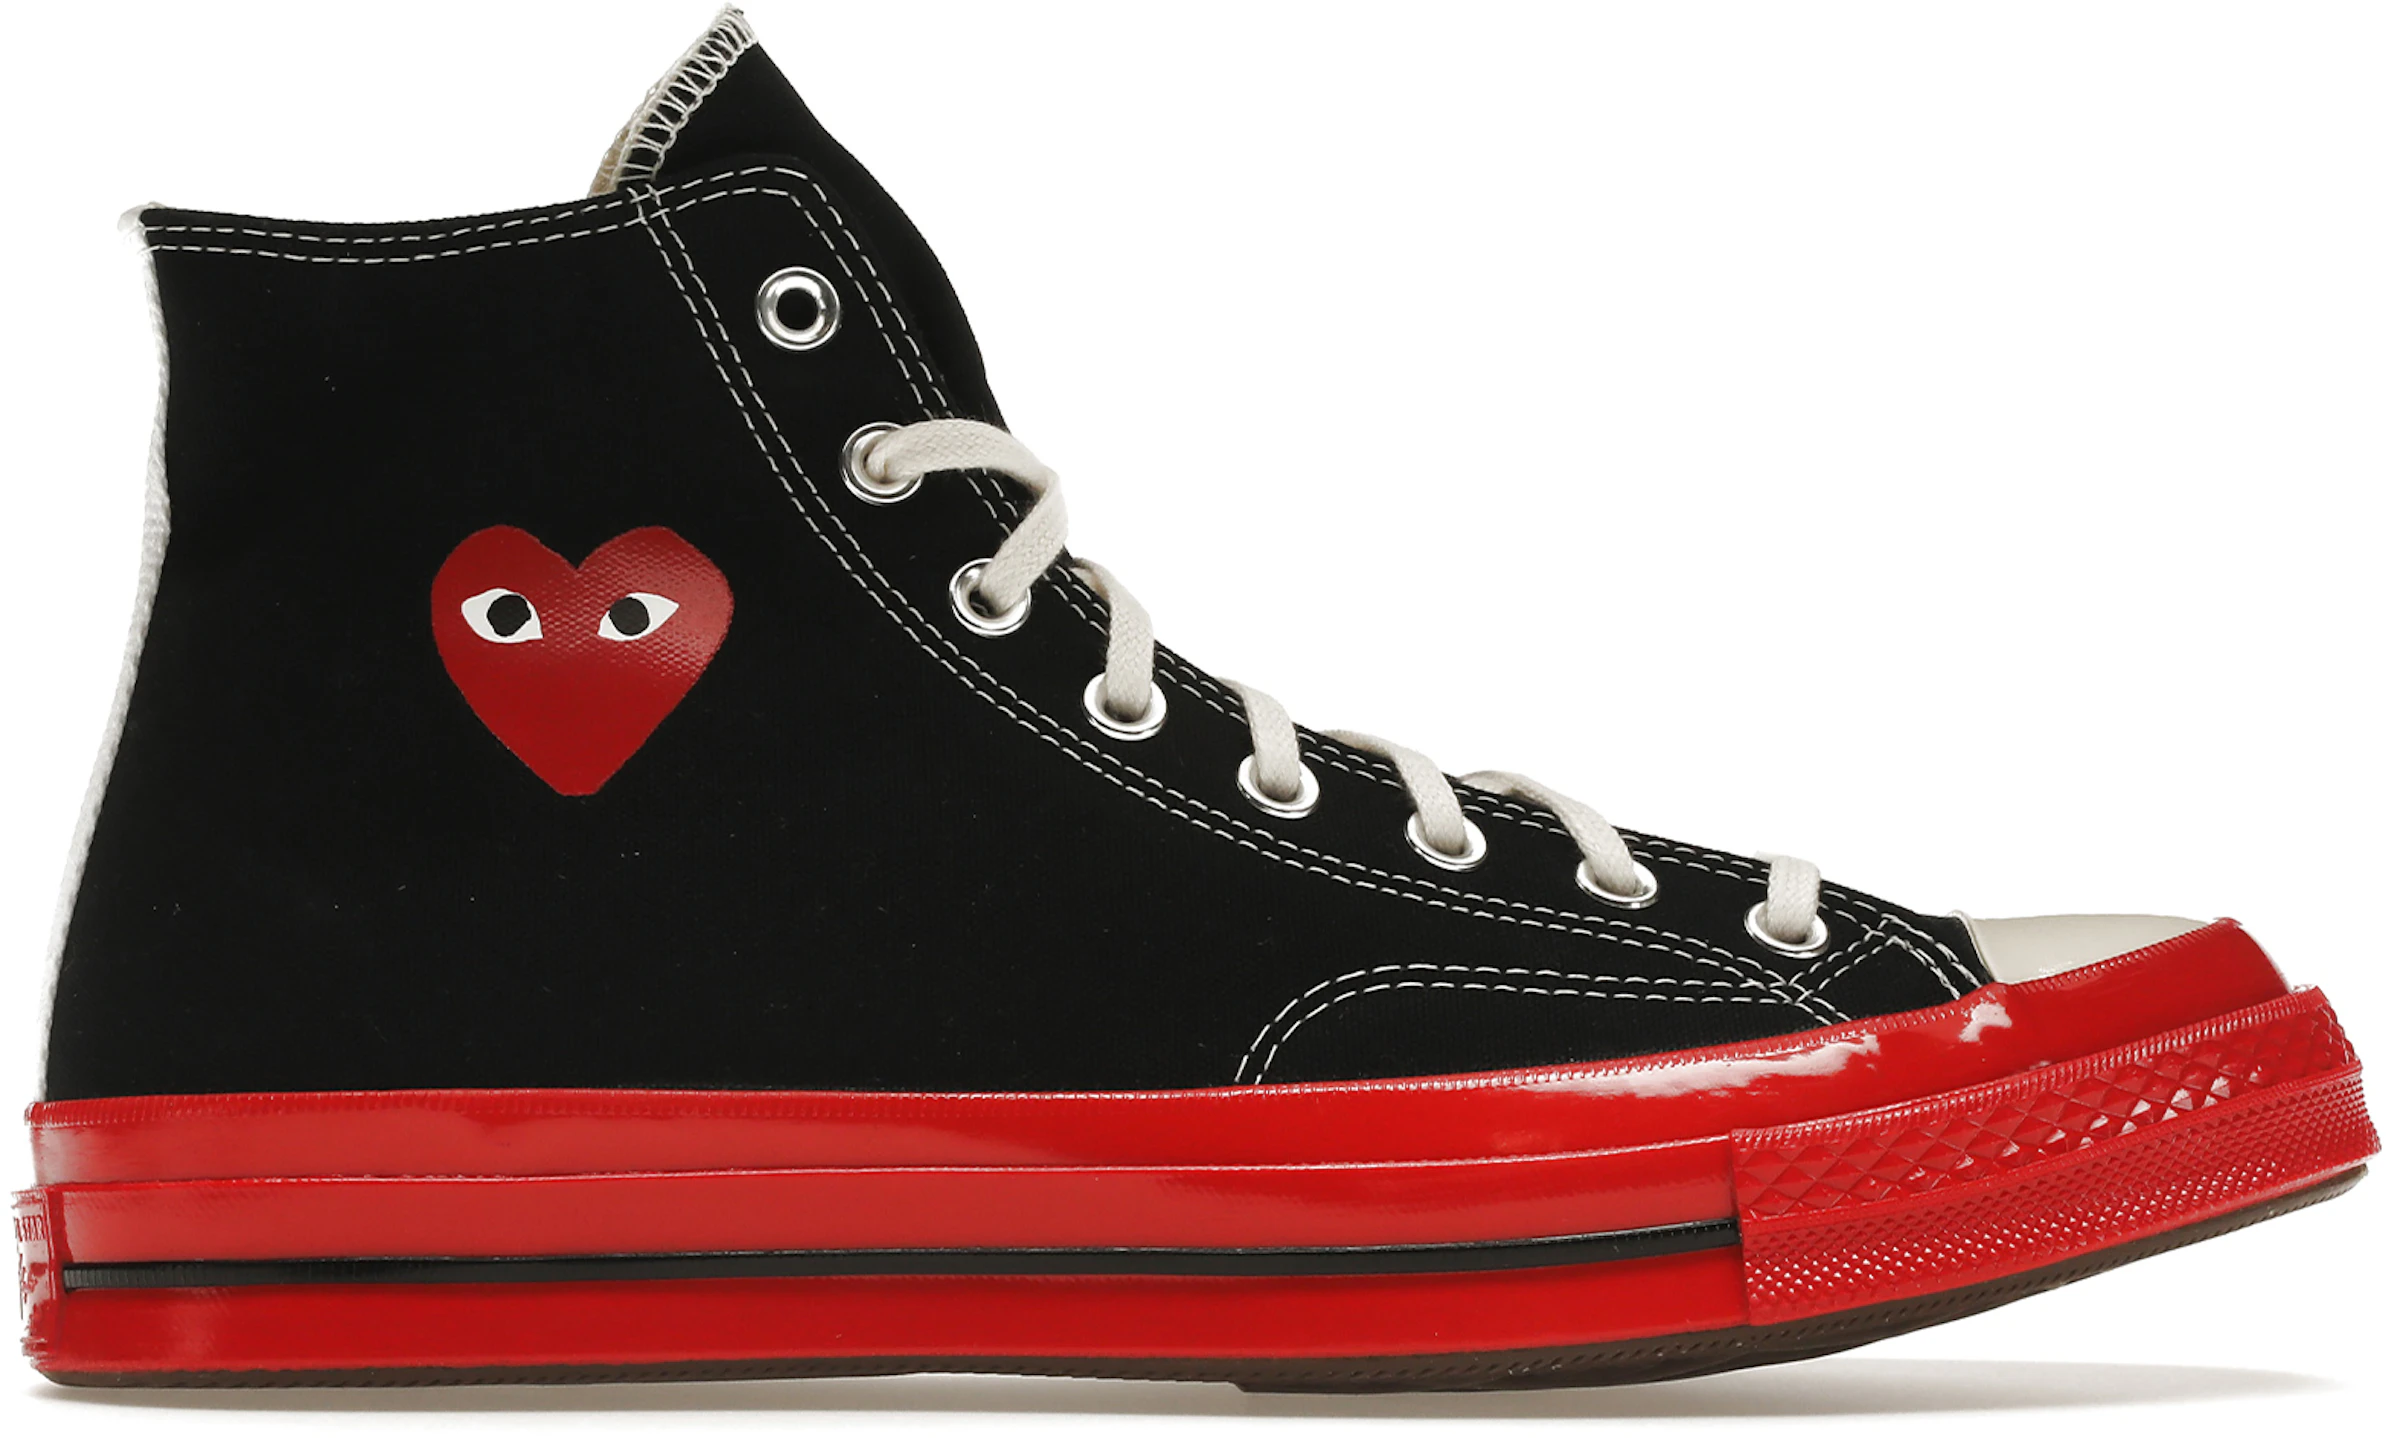 Converse Taylor All-Star 70 Hi Comme des Garcons PLAY Black Red Midsole - A01793C US